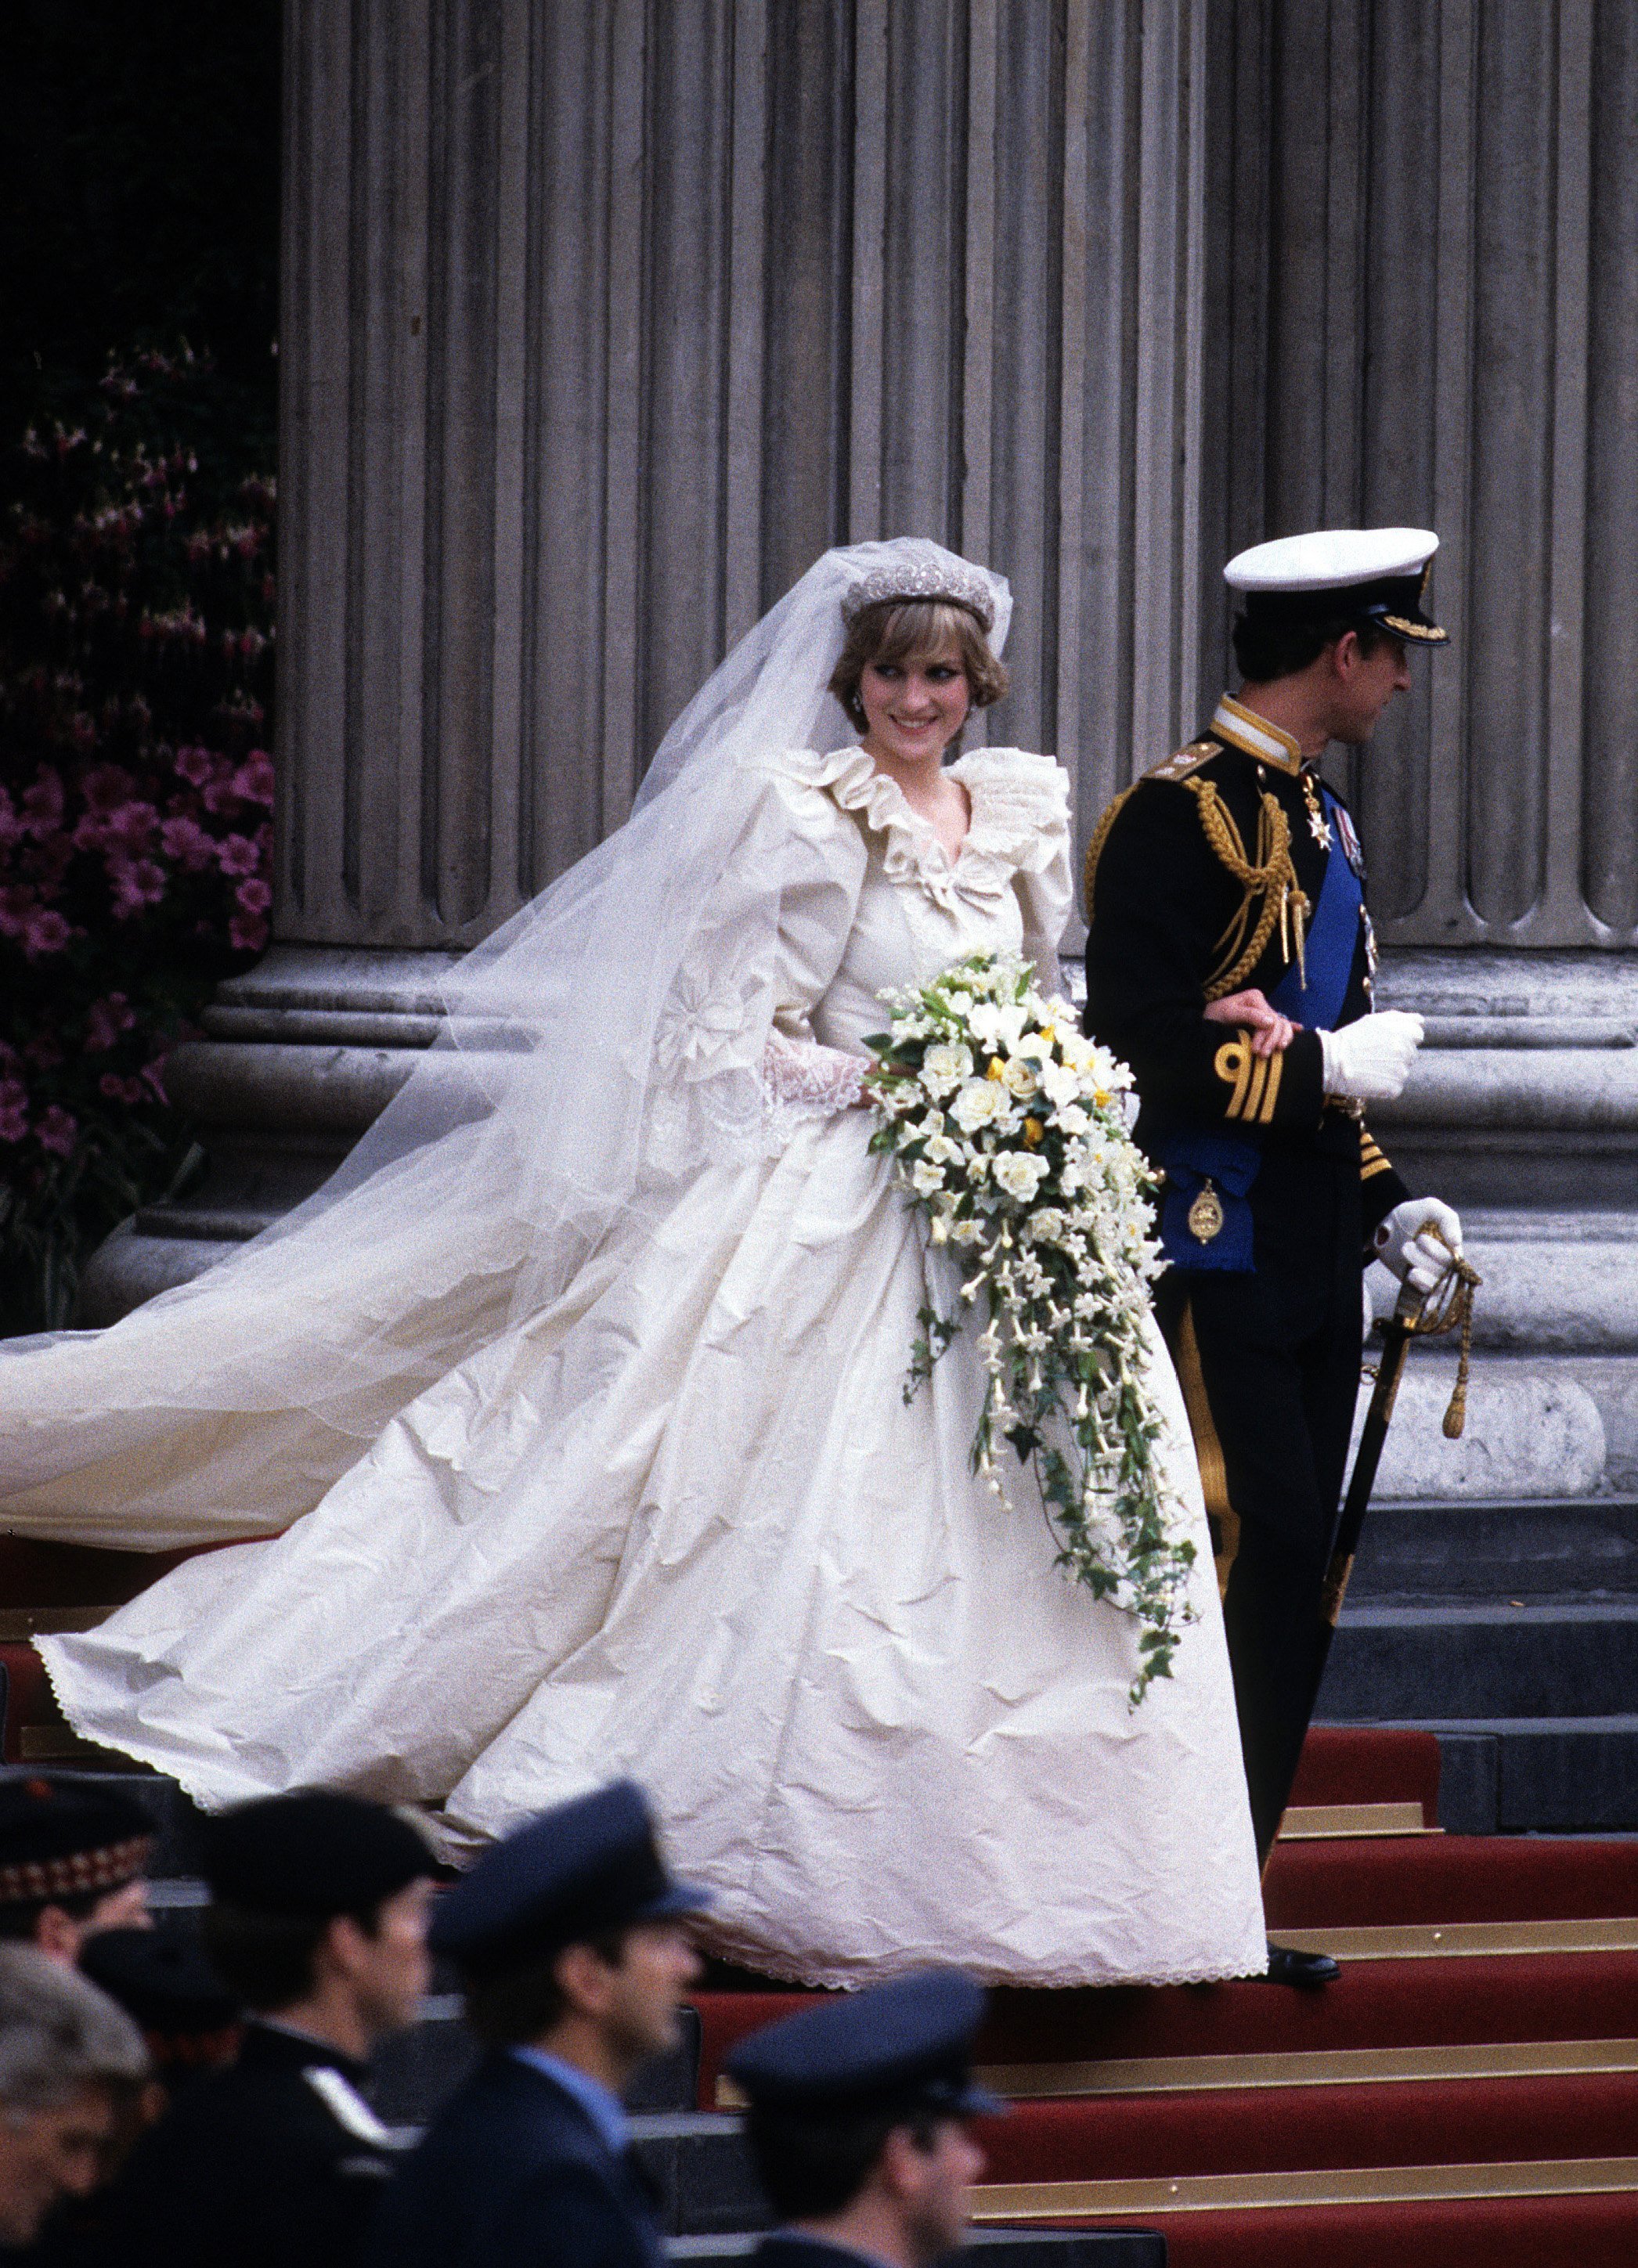 The wedding of Princess Diana and Prince Charles in 1981 | Photo: Getty Images